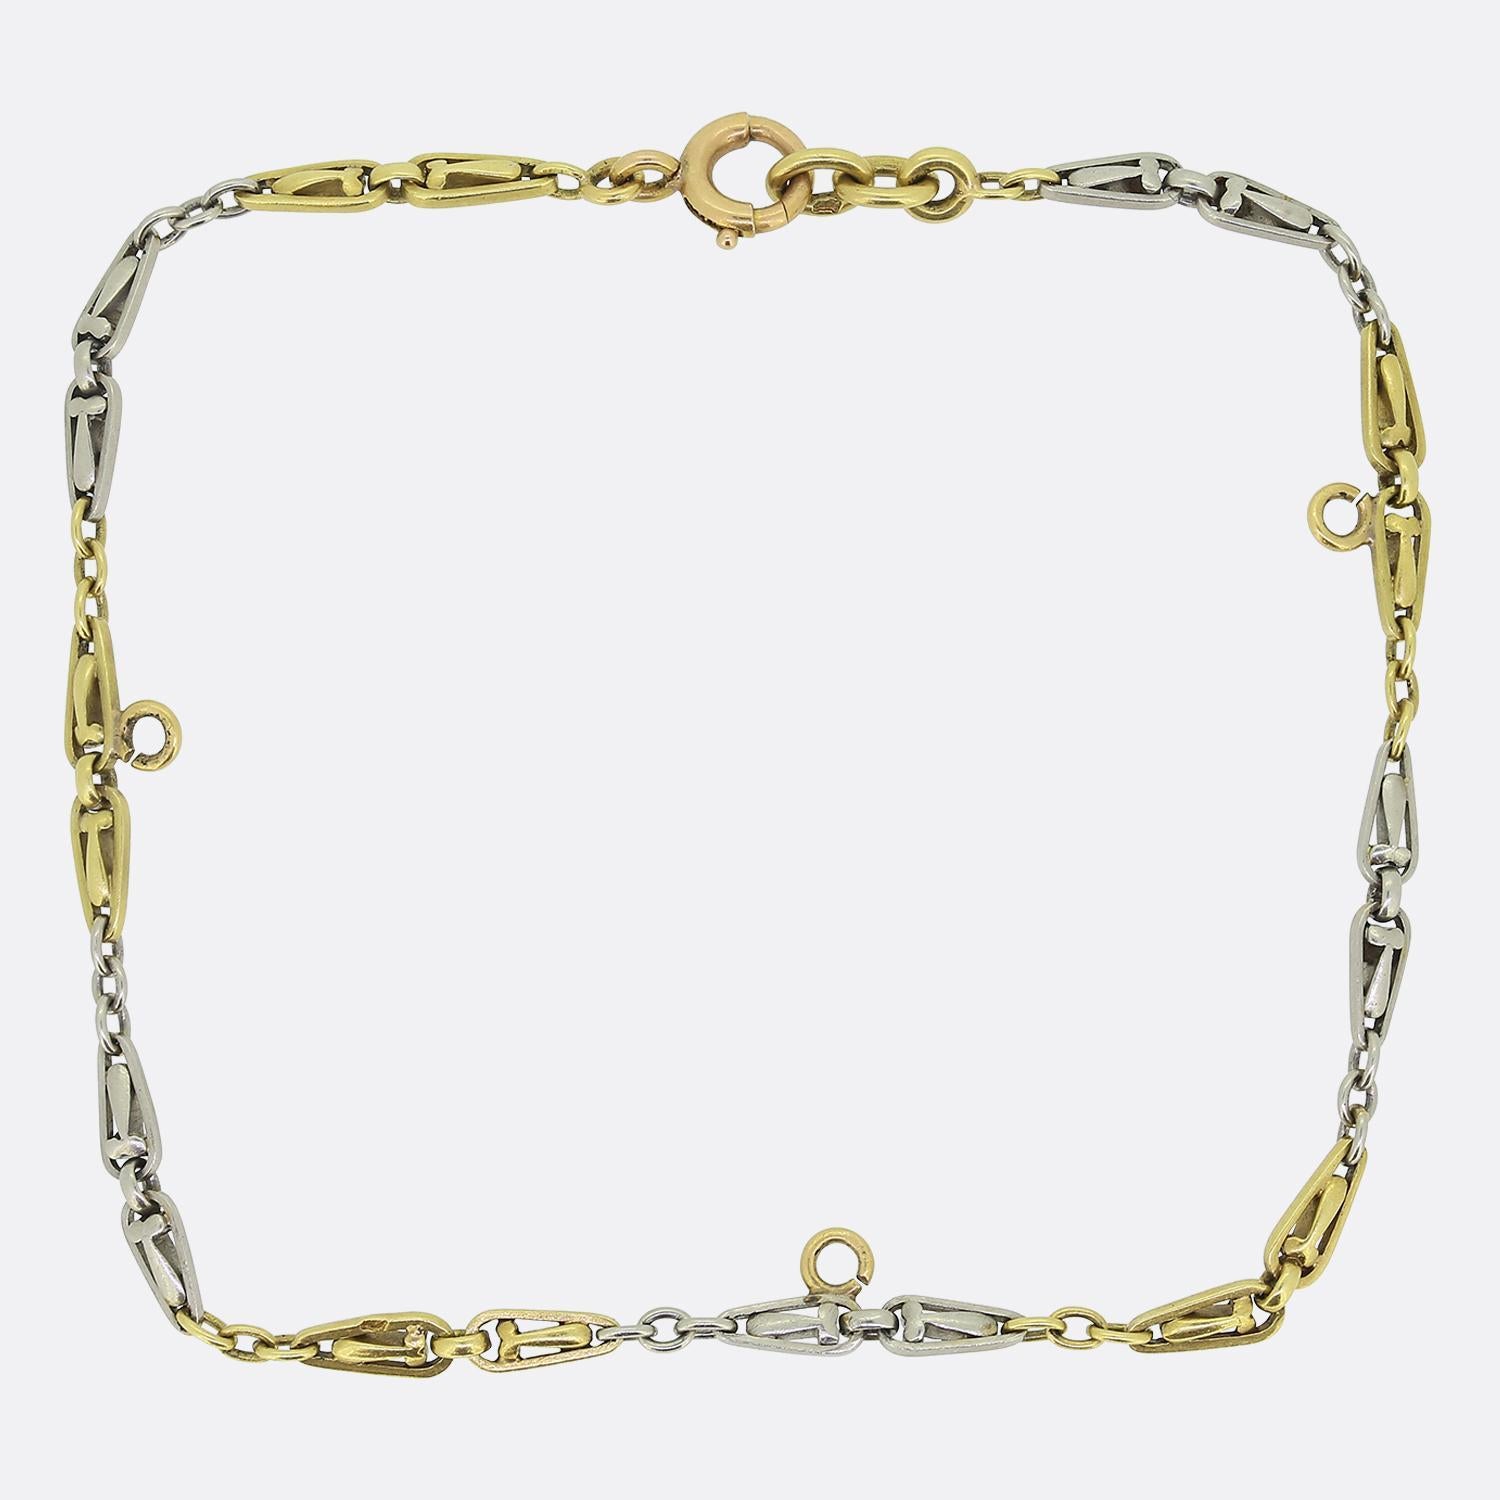 Here we have a lovely vintage charm bracelet. This (currently plain) piece is comprised of ornate matching fancy links in both platinum and a rich 18ct yellow gold. Each yellow gold link posses a jump ring on the outside freely available for the